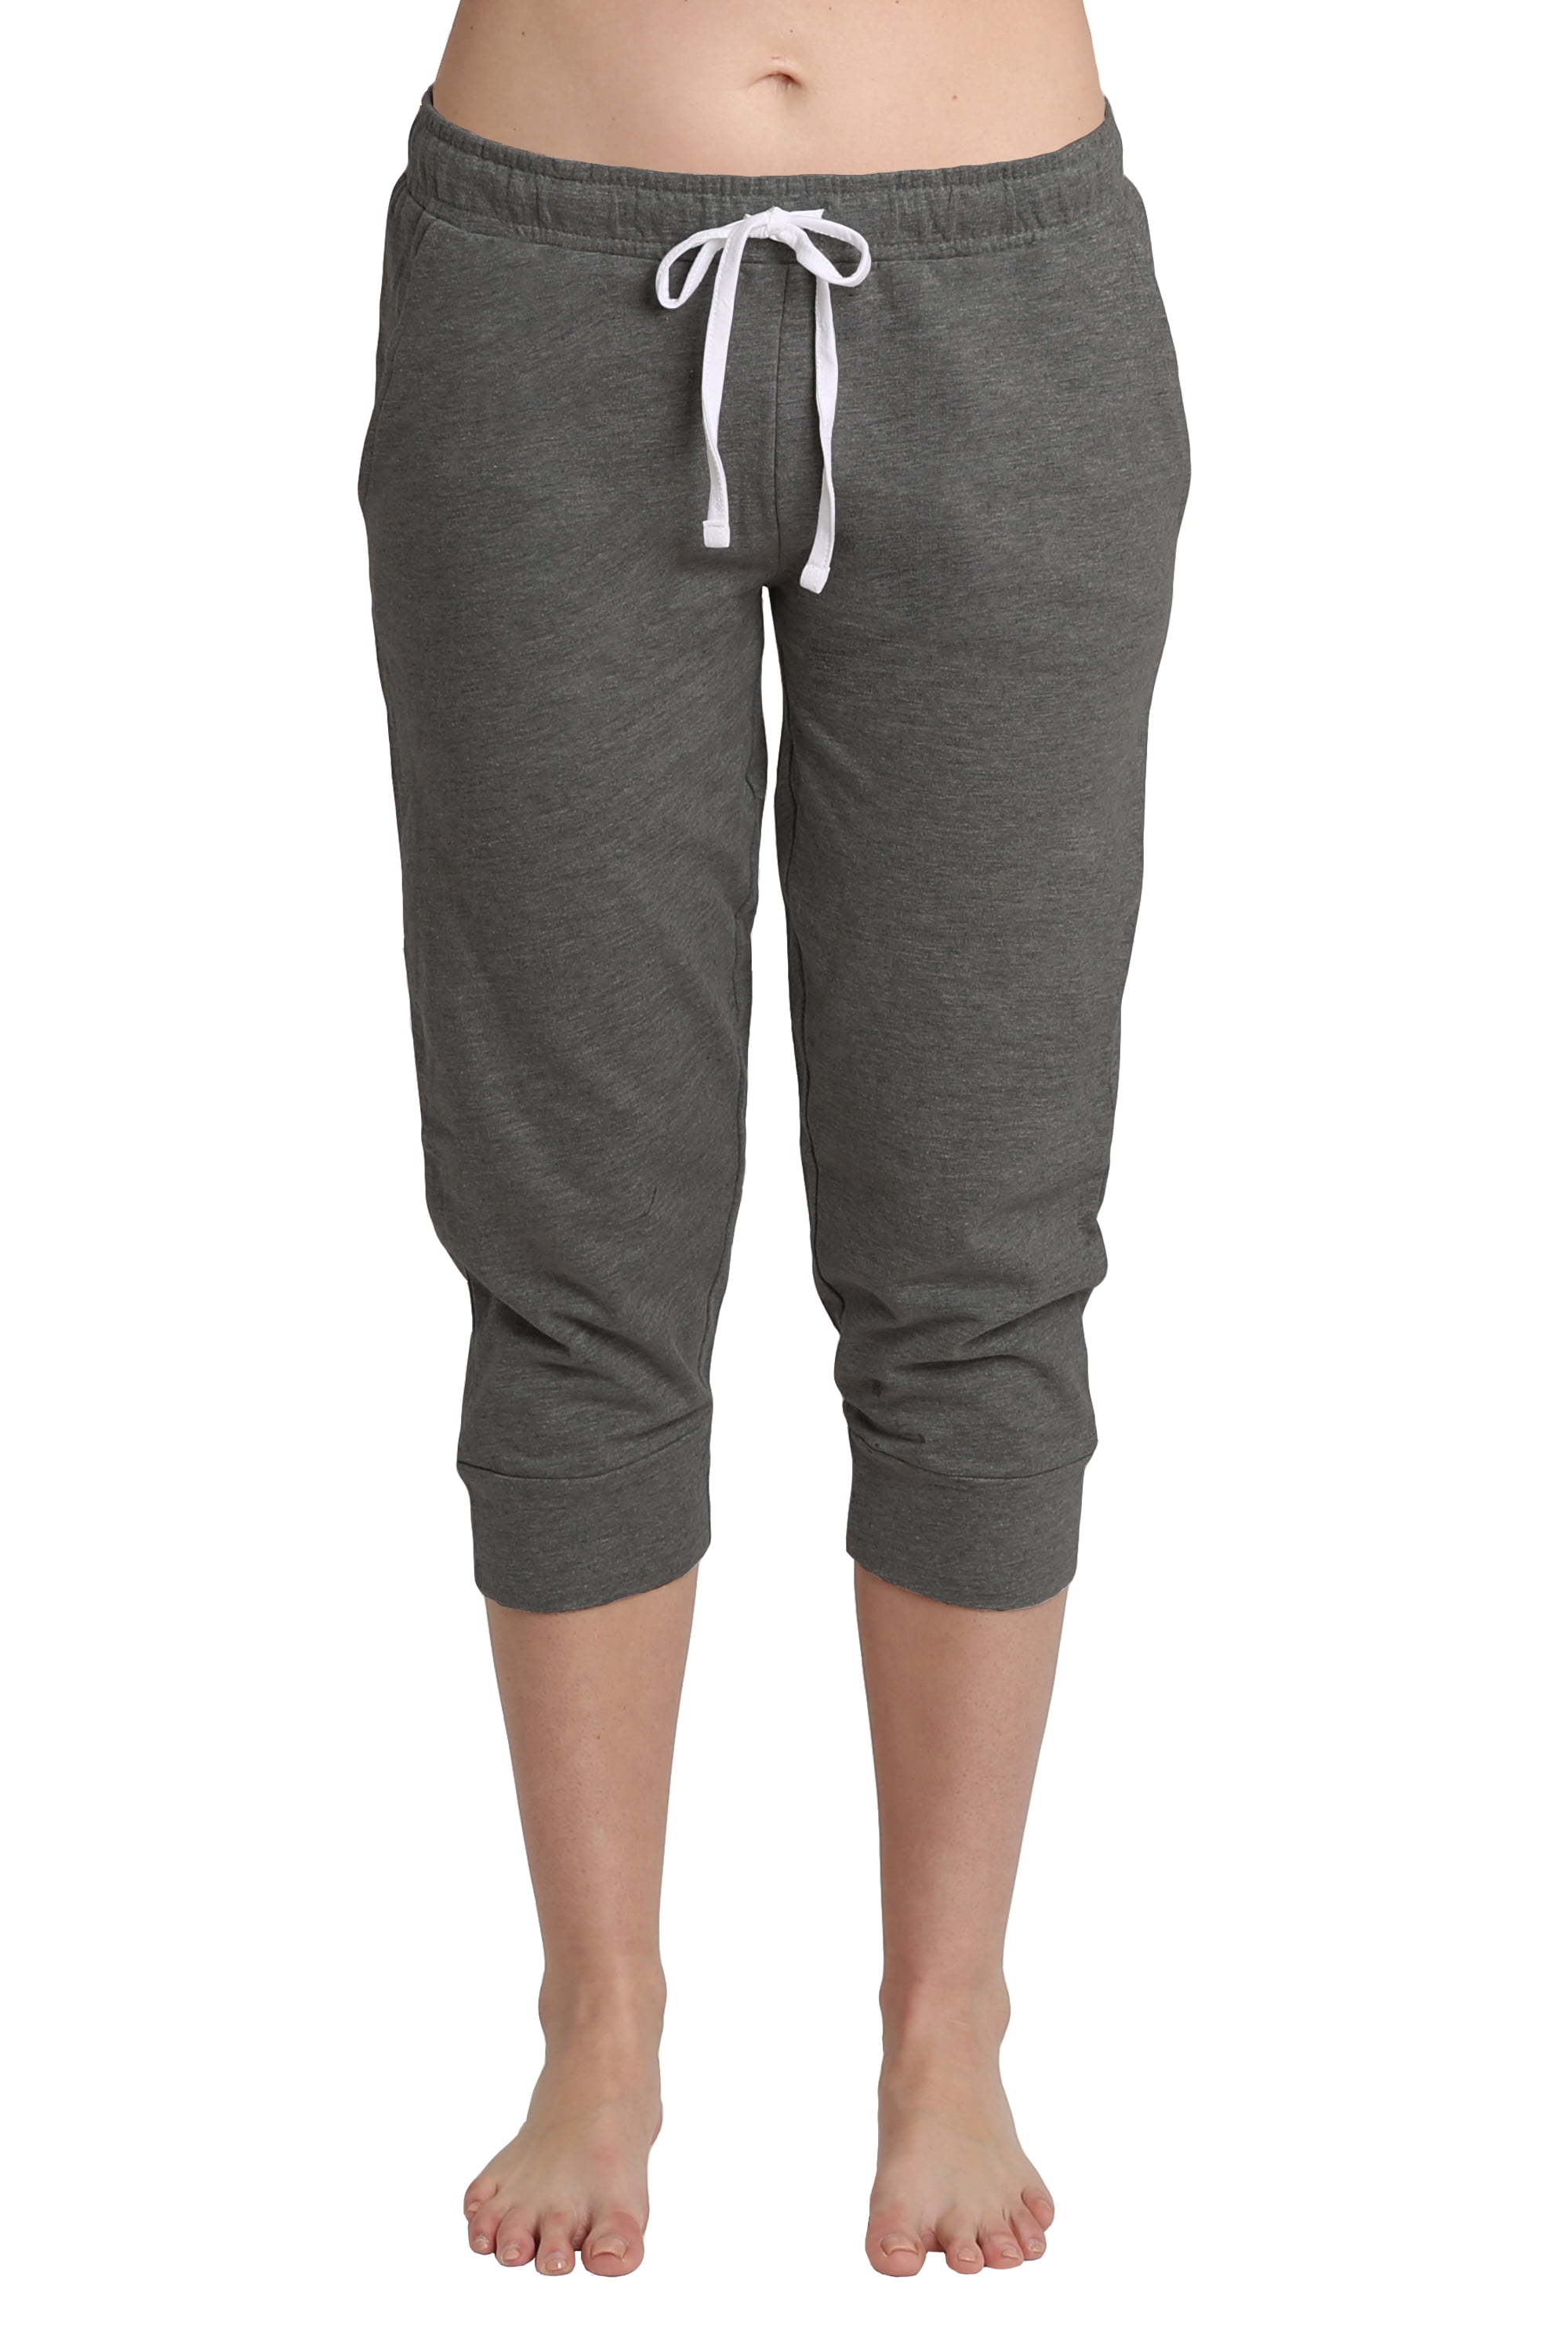 LaClef Womens Maternity French Terry Sweatpants 